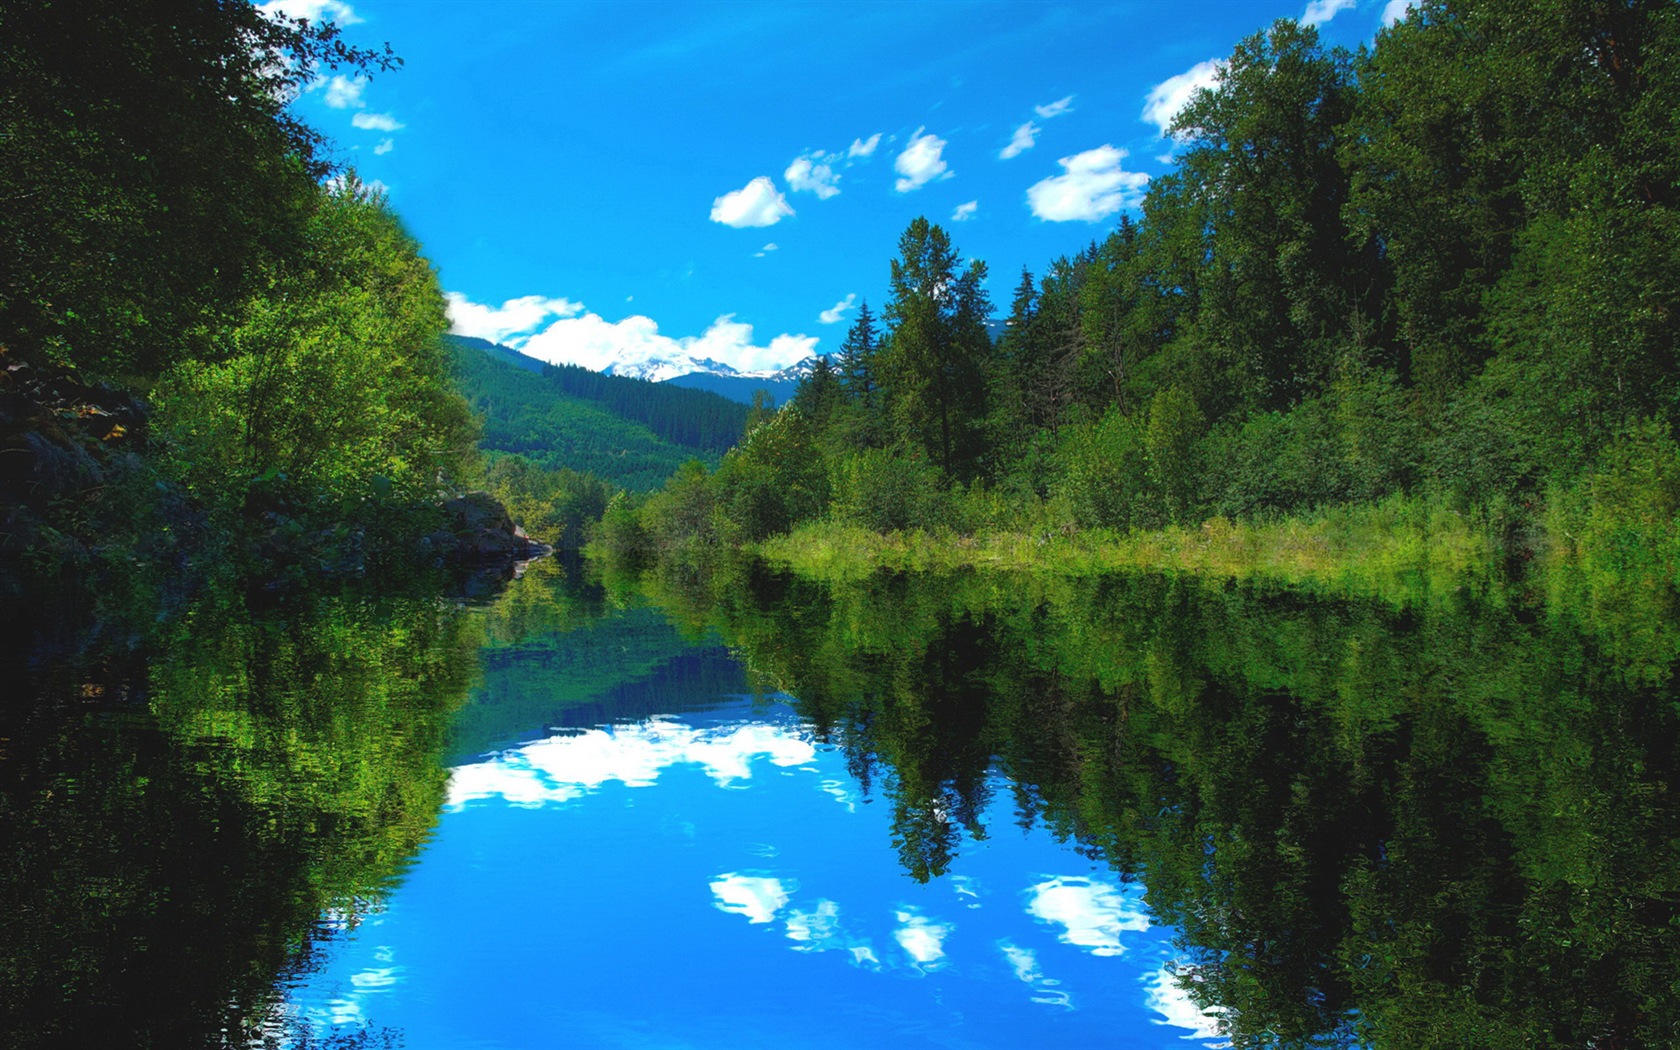 Reflection in the water natural scenery wallpaper #4 - 1680x1050